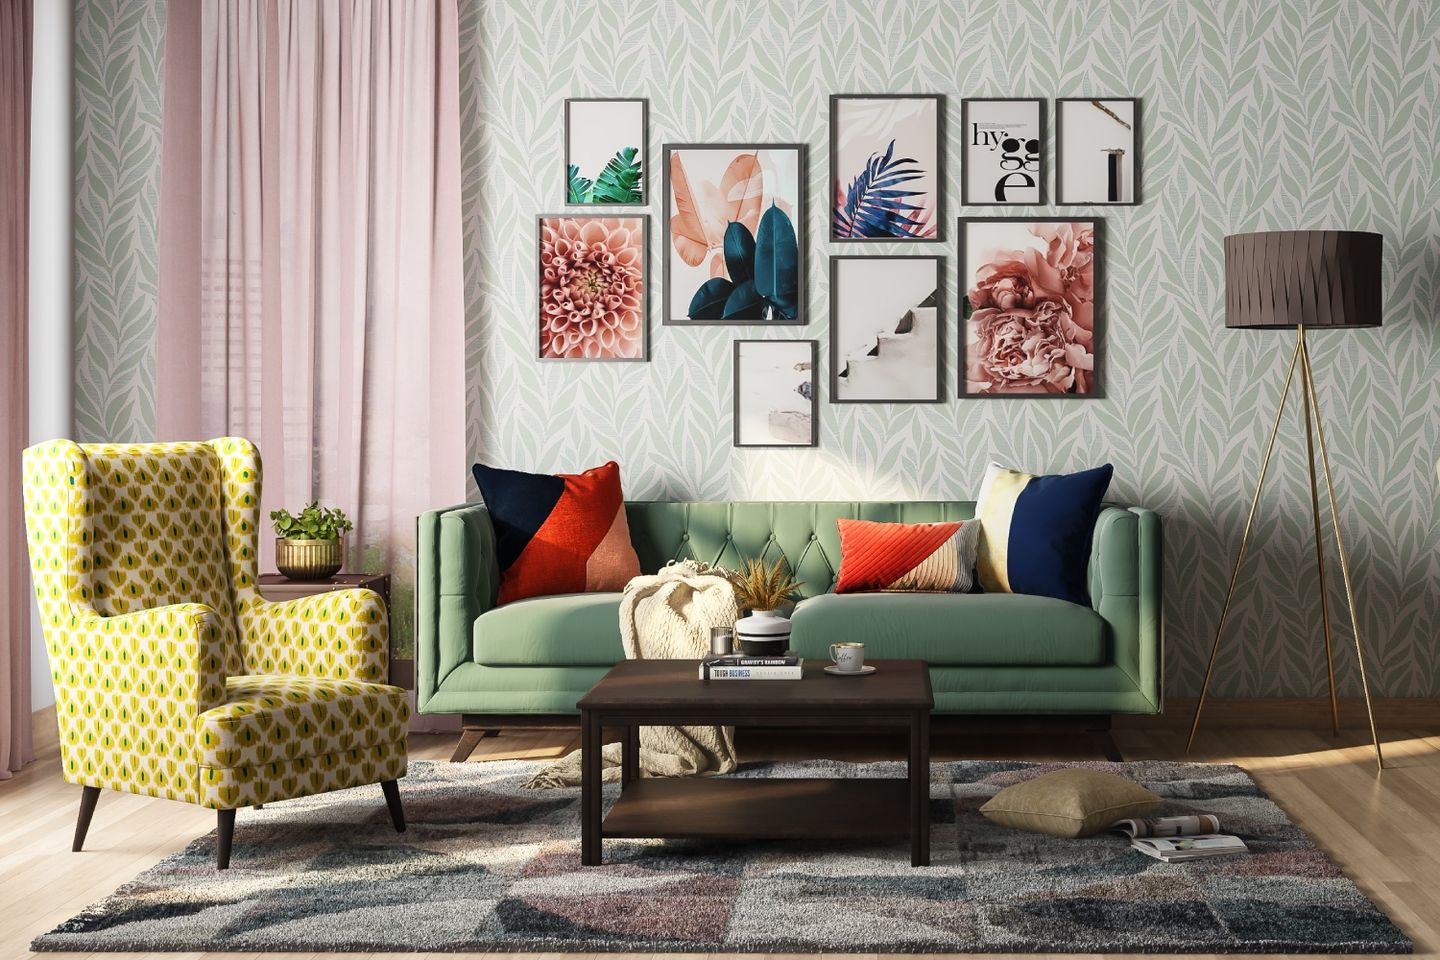 Living Room Design With Green Sofa, Yellow Patterned Accent Chair And ...